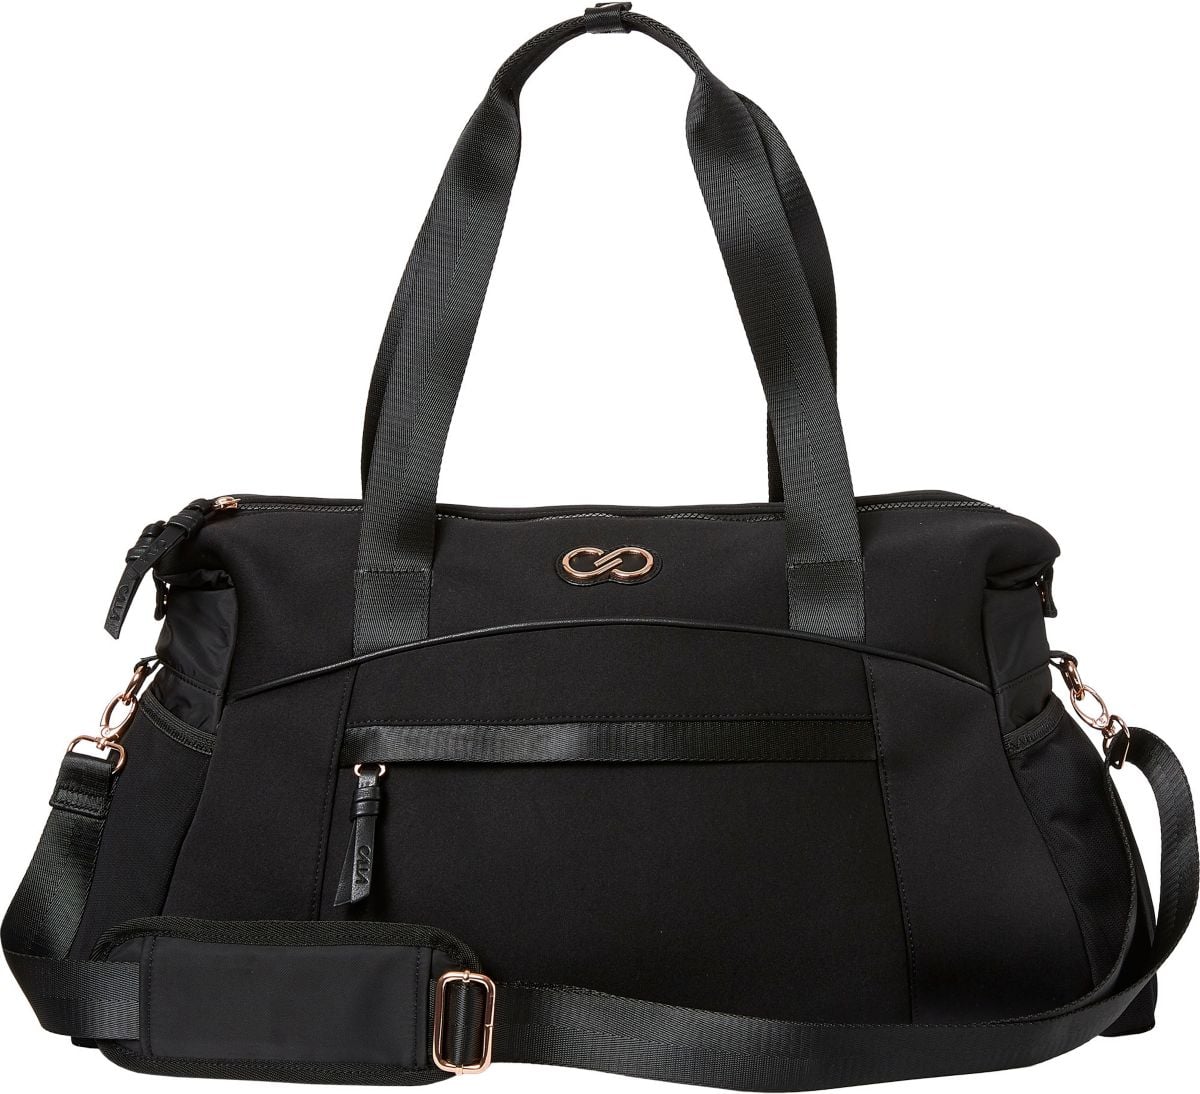 Calia By Carrie Underwood Sport Duffel 19 Gym Bags For 50 Or